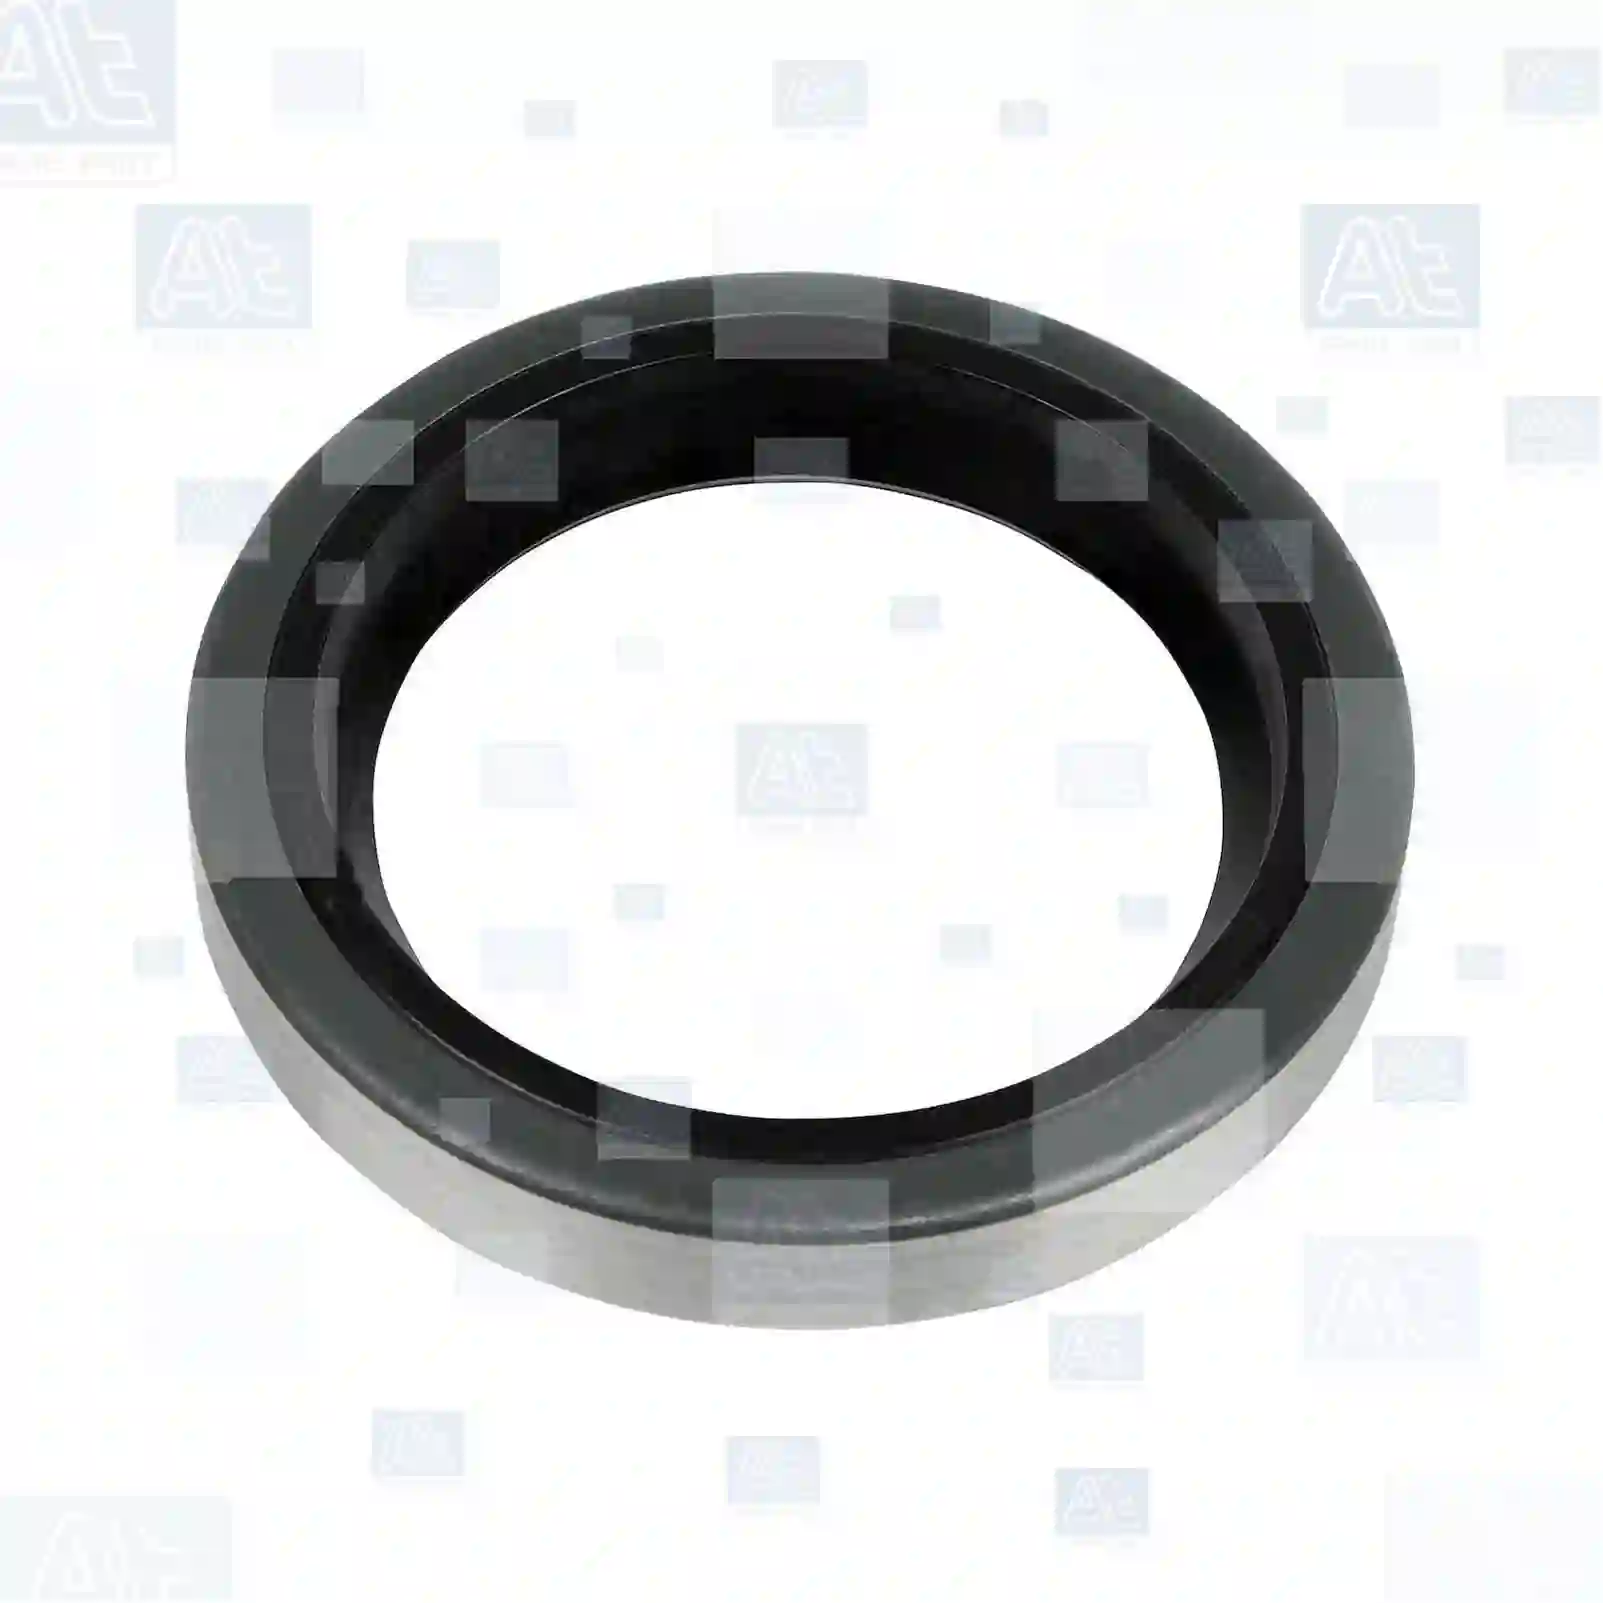 Oil seal, 77731983, 0586697, 586697, 04117801, 40001110, 79007266, 6109963, 01274257, 02980071, 09933015, 1274257, 2980071, 42487485, 9933015, 06562790042, 81965020248, A0851853300, 0009972147, 0079972147, 0099974746, 0003207340, 0851853300, 5000250015, 5000802710, 5000839806, 7701014157, 880221400, 99112220821, 6857279, 6876127 ||  77731983 At Spare Part | Engine, Accelerator Pedal, Camshaft, Connecting Rod, Crankcase, Crankshaft, Cylinder Head, Engine Suspension Mountings, Exhaust Manifold, Exhaust Gas Recirculation, Filter Kits, Flywheel Housing, General Overhaul Kits, Engine, Intake Manifold, Oil Cleaner, Oil Cooler, Oil Filter, Oil Pump, Oil Sump, Piston & Liner, Sensor & Switch, Timing Case, Turbocharger, Cooling System, Belt Tensioner, Coolant Filter, Coolant Pipe, Corrosion Prevention Agent, Drive, Expansion Tank, Fan, Intercooler, Monitors & Gauges, Radiator, Thermostat, V-Belt / Timing belt, Water Pump, Fuel System, Electronical Injector Unit, Feed Pump, Fuel Filter, cpl., Fuel Gauge Sender,  Fuel Line, Fuel Pump, Fuel Tank, Injection Line Kit, Injection Pump, Exhaust System, Clutch & Pedal, Gearbox, Propeller Shaft, Axles, Brake System, Hubs & Wheels, Suspension, Leaf Spring, Universal Parts / Accessories, Steering, Electrical System, Cabin Oil seal, 77731983, 0586697, 586697, 04117801, 40001110, 79007266, 6109963, 01274257, 02980071, 09933015, 1274257, 2980071, 42487485, 9933015, 06562790042, 81965020248, A0851853300, 0009972147, 0079972147, 0099974746, 0003207340, 0851853300, 5000250015, 5000802710, 5000839806, 7701014157, 880221400, 99112220821, 6857279, 6876127 ||  77731983 At Spare Part | Engine, Accelerator Pedal, Camshaft, Connecting Rod, Crankcase, Crankshaft, Cylinder Head, Engine Suspension Mountings, Exhaust Manifold, Exhaust Gas Recirculation, Filter Kits, Flywheel Housing, General Overhaul Kits, Engine, Intake Manifold, Oil Cleaner, Oil Cooler, Oil Filter, Oil Pump, Oil Sump, Piston & Liner, Sensor & Switch, Timing Case, Turbocharger, Cooling System, Belt Tensioner, Coolant Filter, Coolant Pipe, Corrosion Prevention Agent, Drive, Expansion Tank, Fan, Intercooler, Monitors & Gauges, Radiator, Thermostat, V-Belt / Timing belt, Water Pump, Fuel System, Electronical Injector Unit, Feed Pump, Fuel Filter, cpl., Fuel Gauge Sender,  Fuel Line, Fuel Pump, Fuel Tank, Injection Line Kit, Injection Pump, Exhaust System, Clutch & Pedal, Gearbox, Propeller Shaft, Axles, Brake System, Hubs & Wheels, Suspension, Leaf Spring, Universal Parts / Accessories, Steering, Electrical System, Cabin